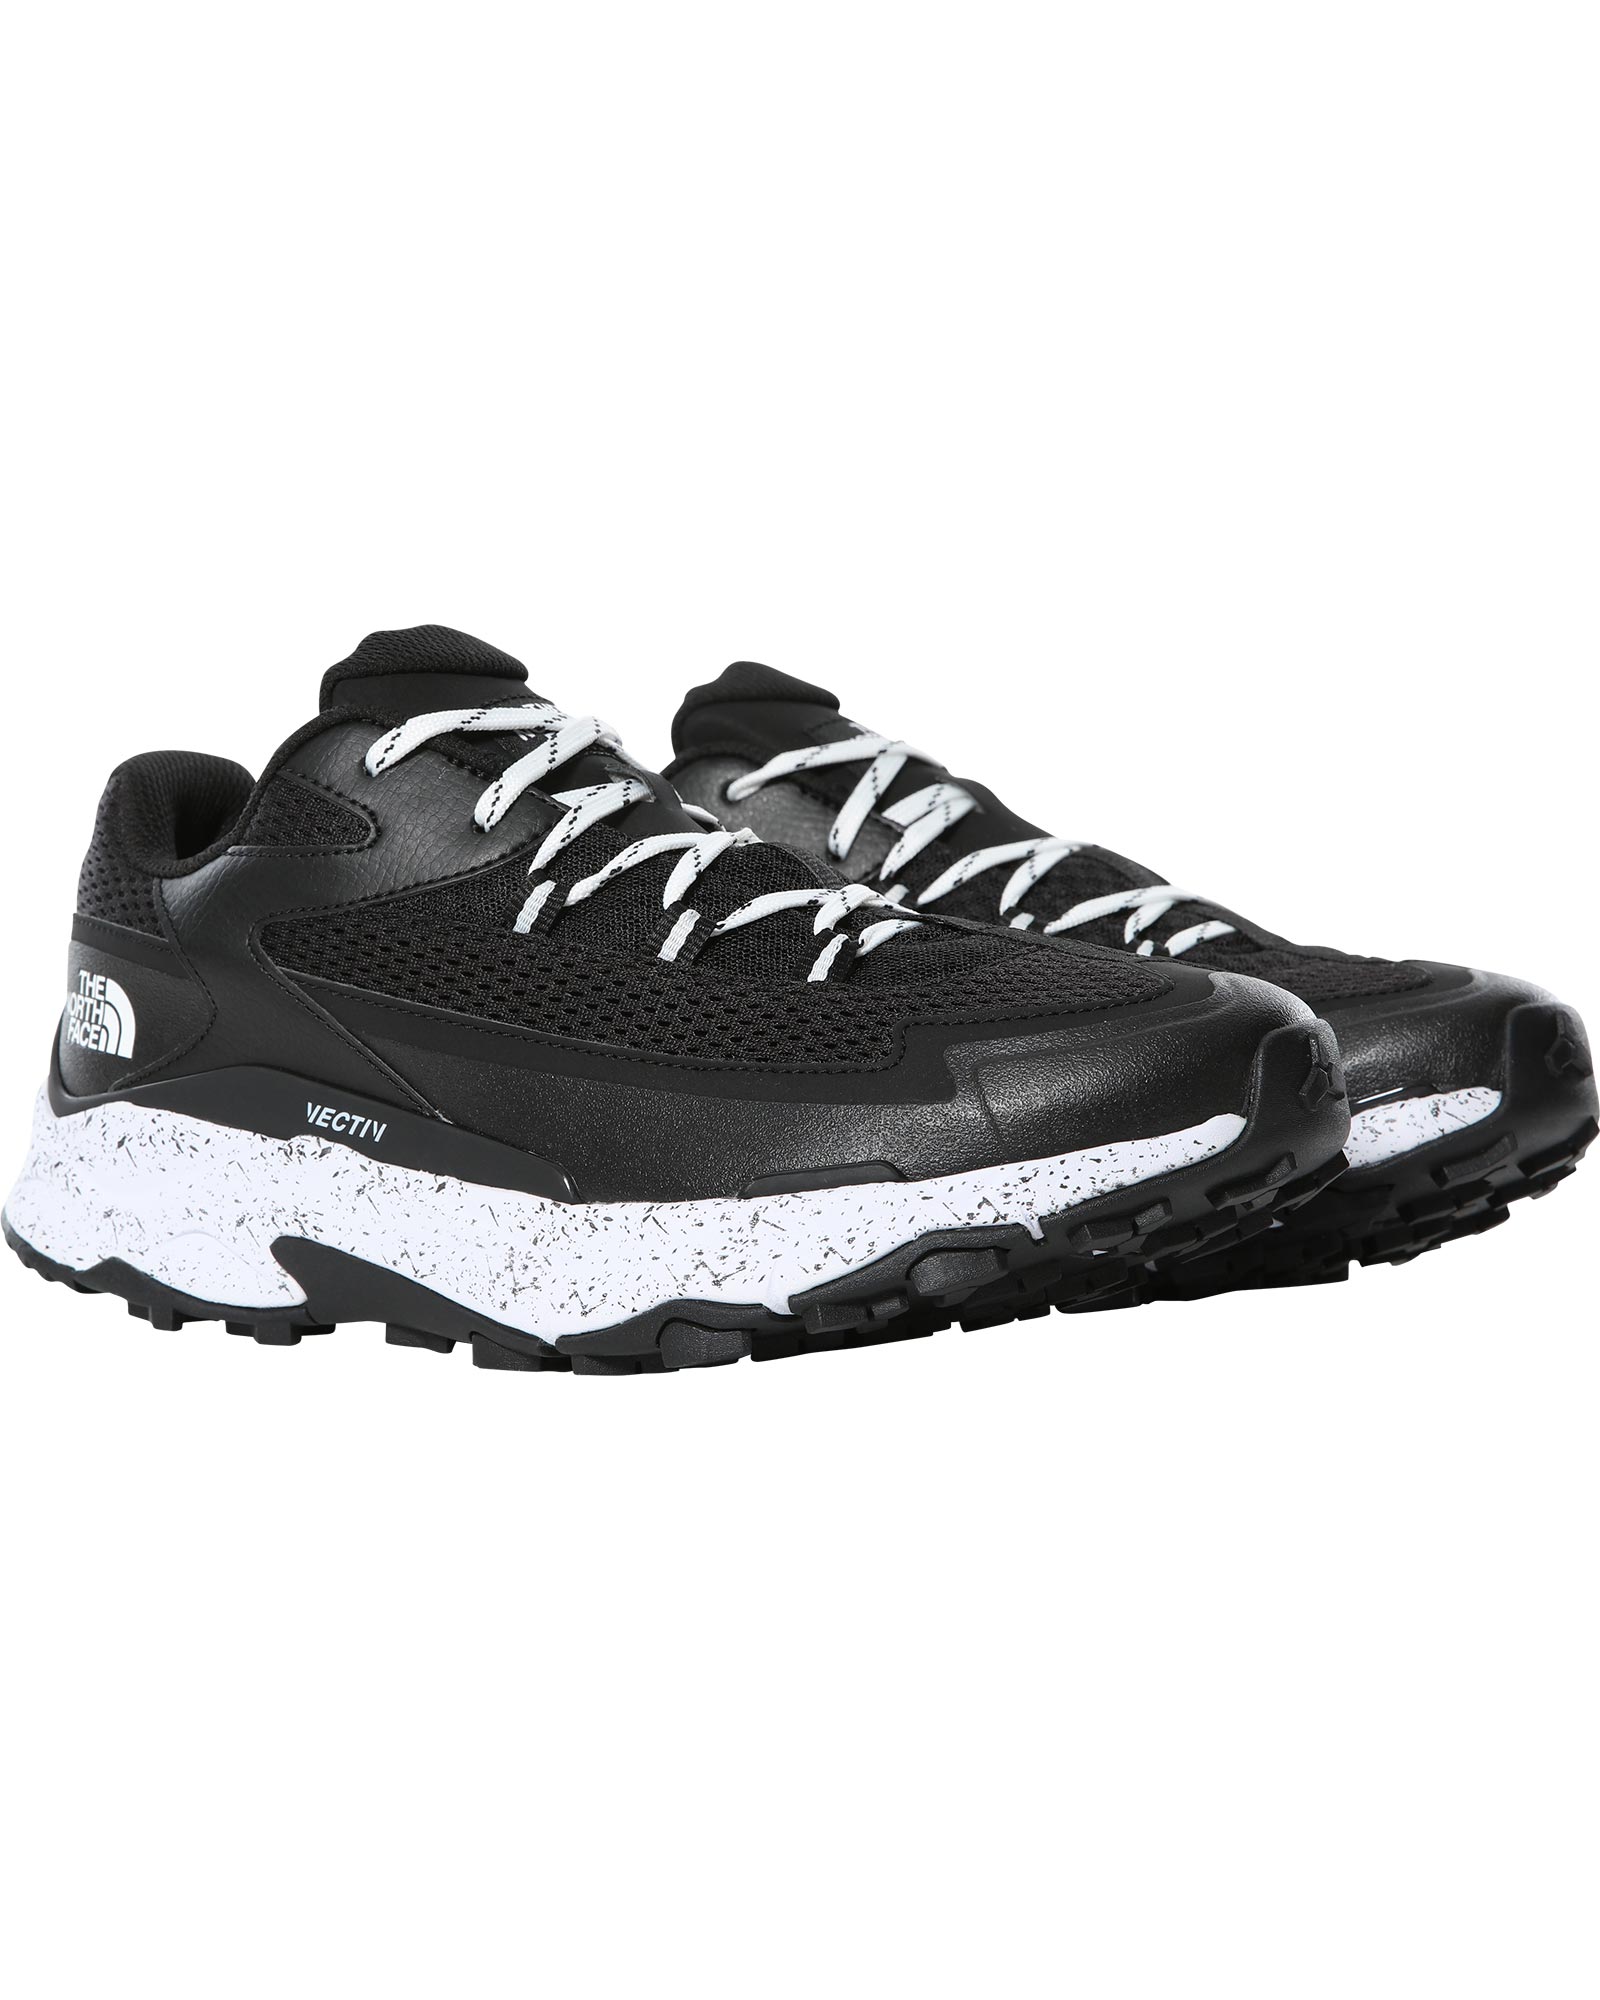 The North Face Vectiv Taraval Mens Shoes